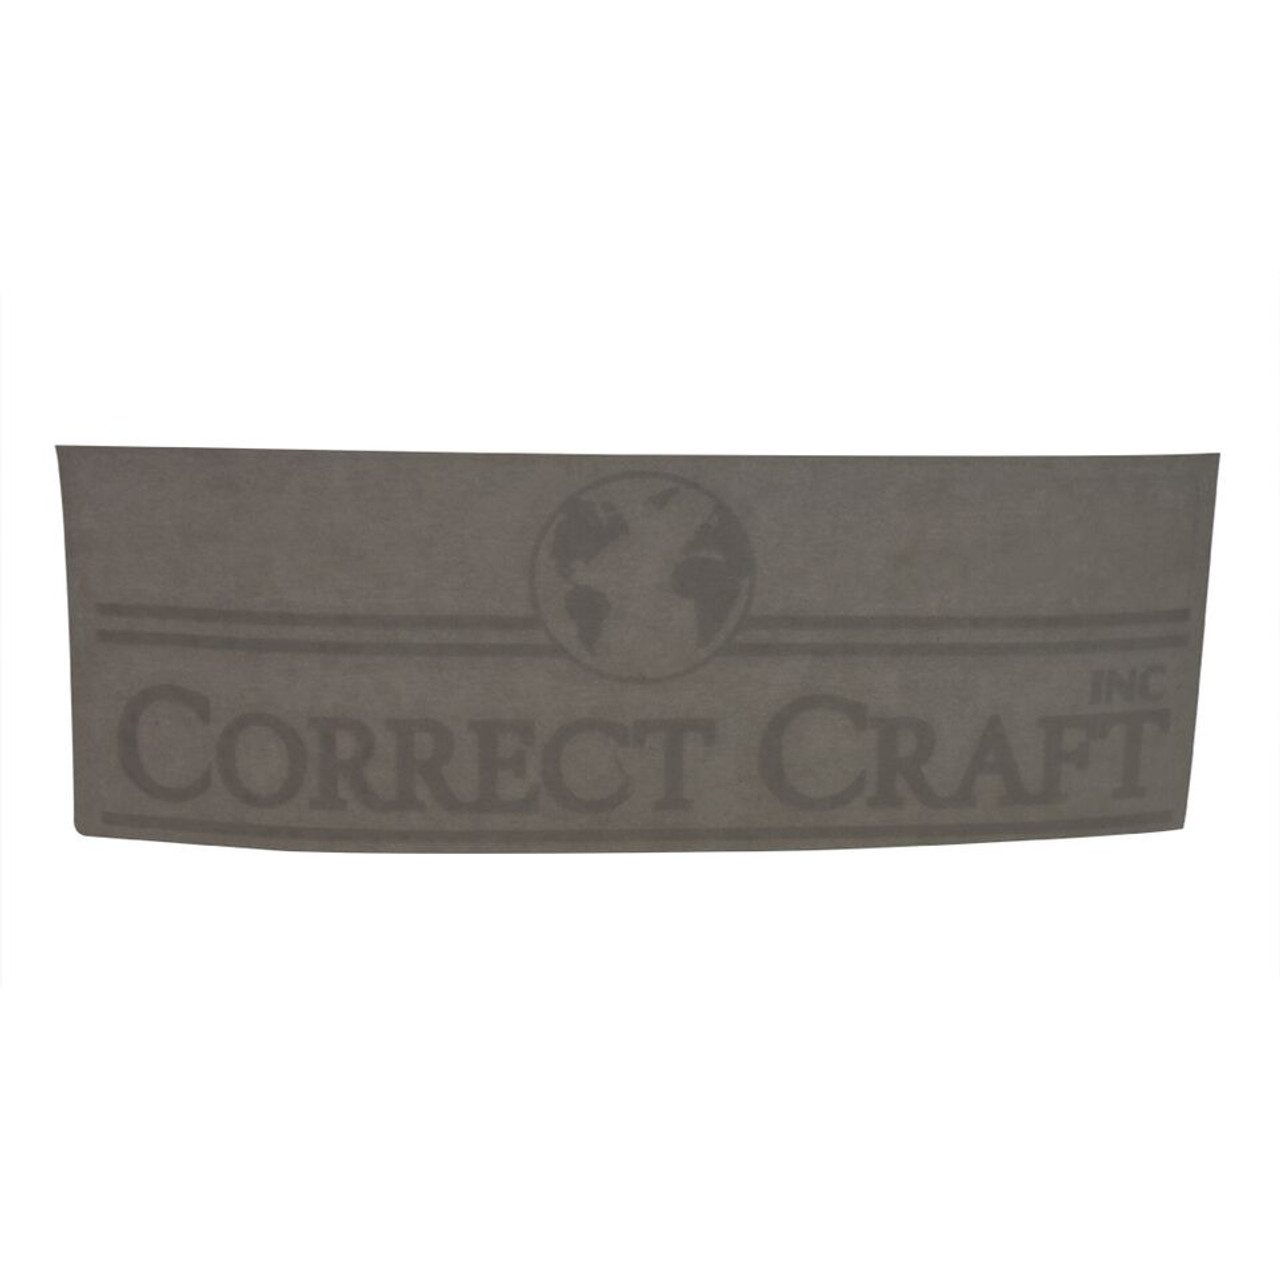 Decal, Corporate Logo, for glove box lid - gray, 90-92